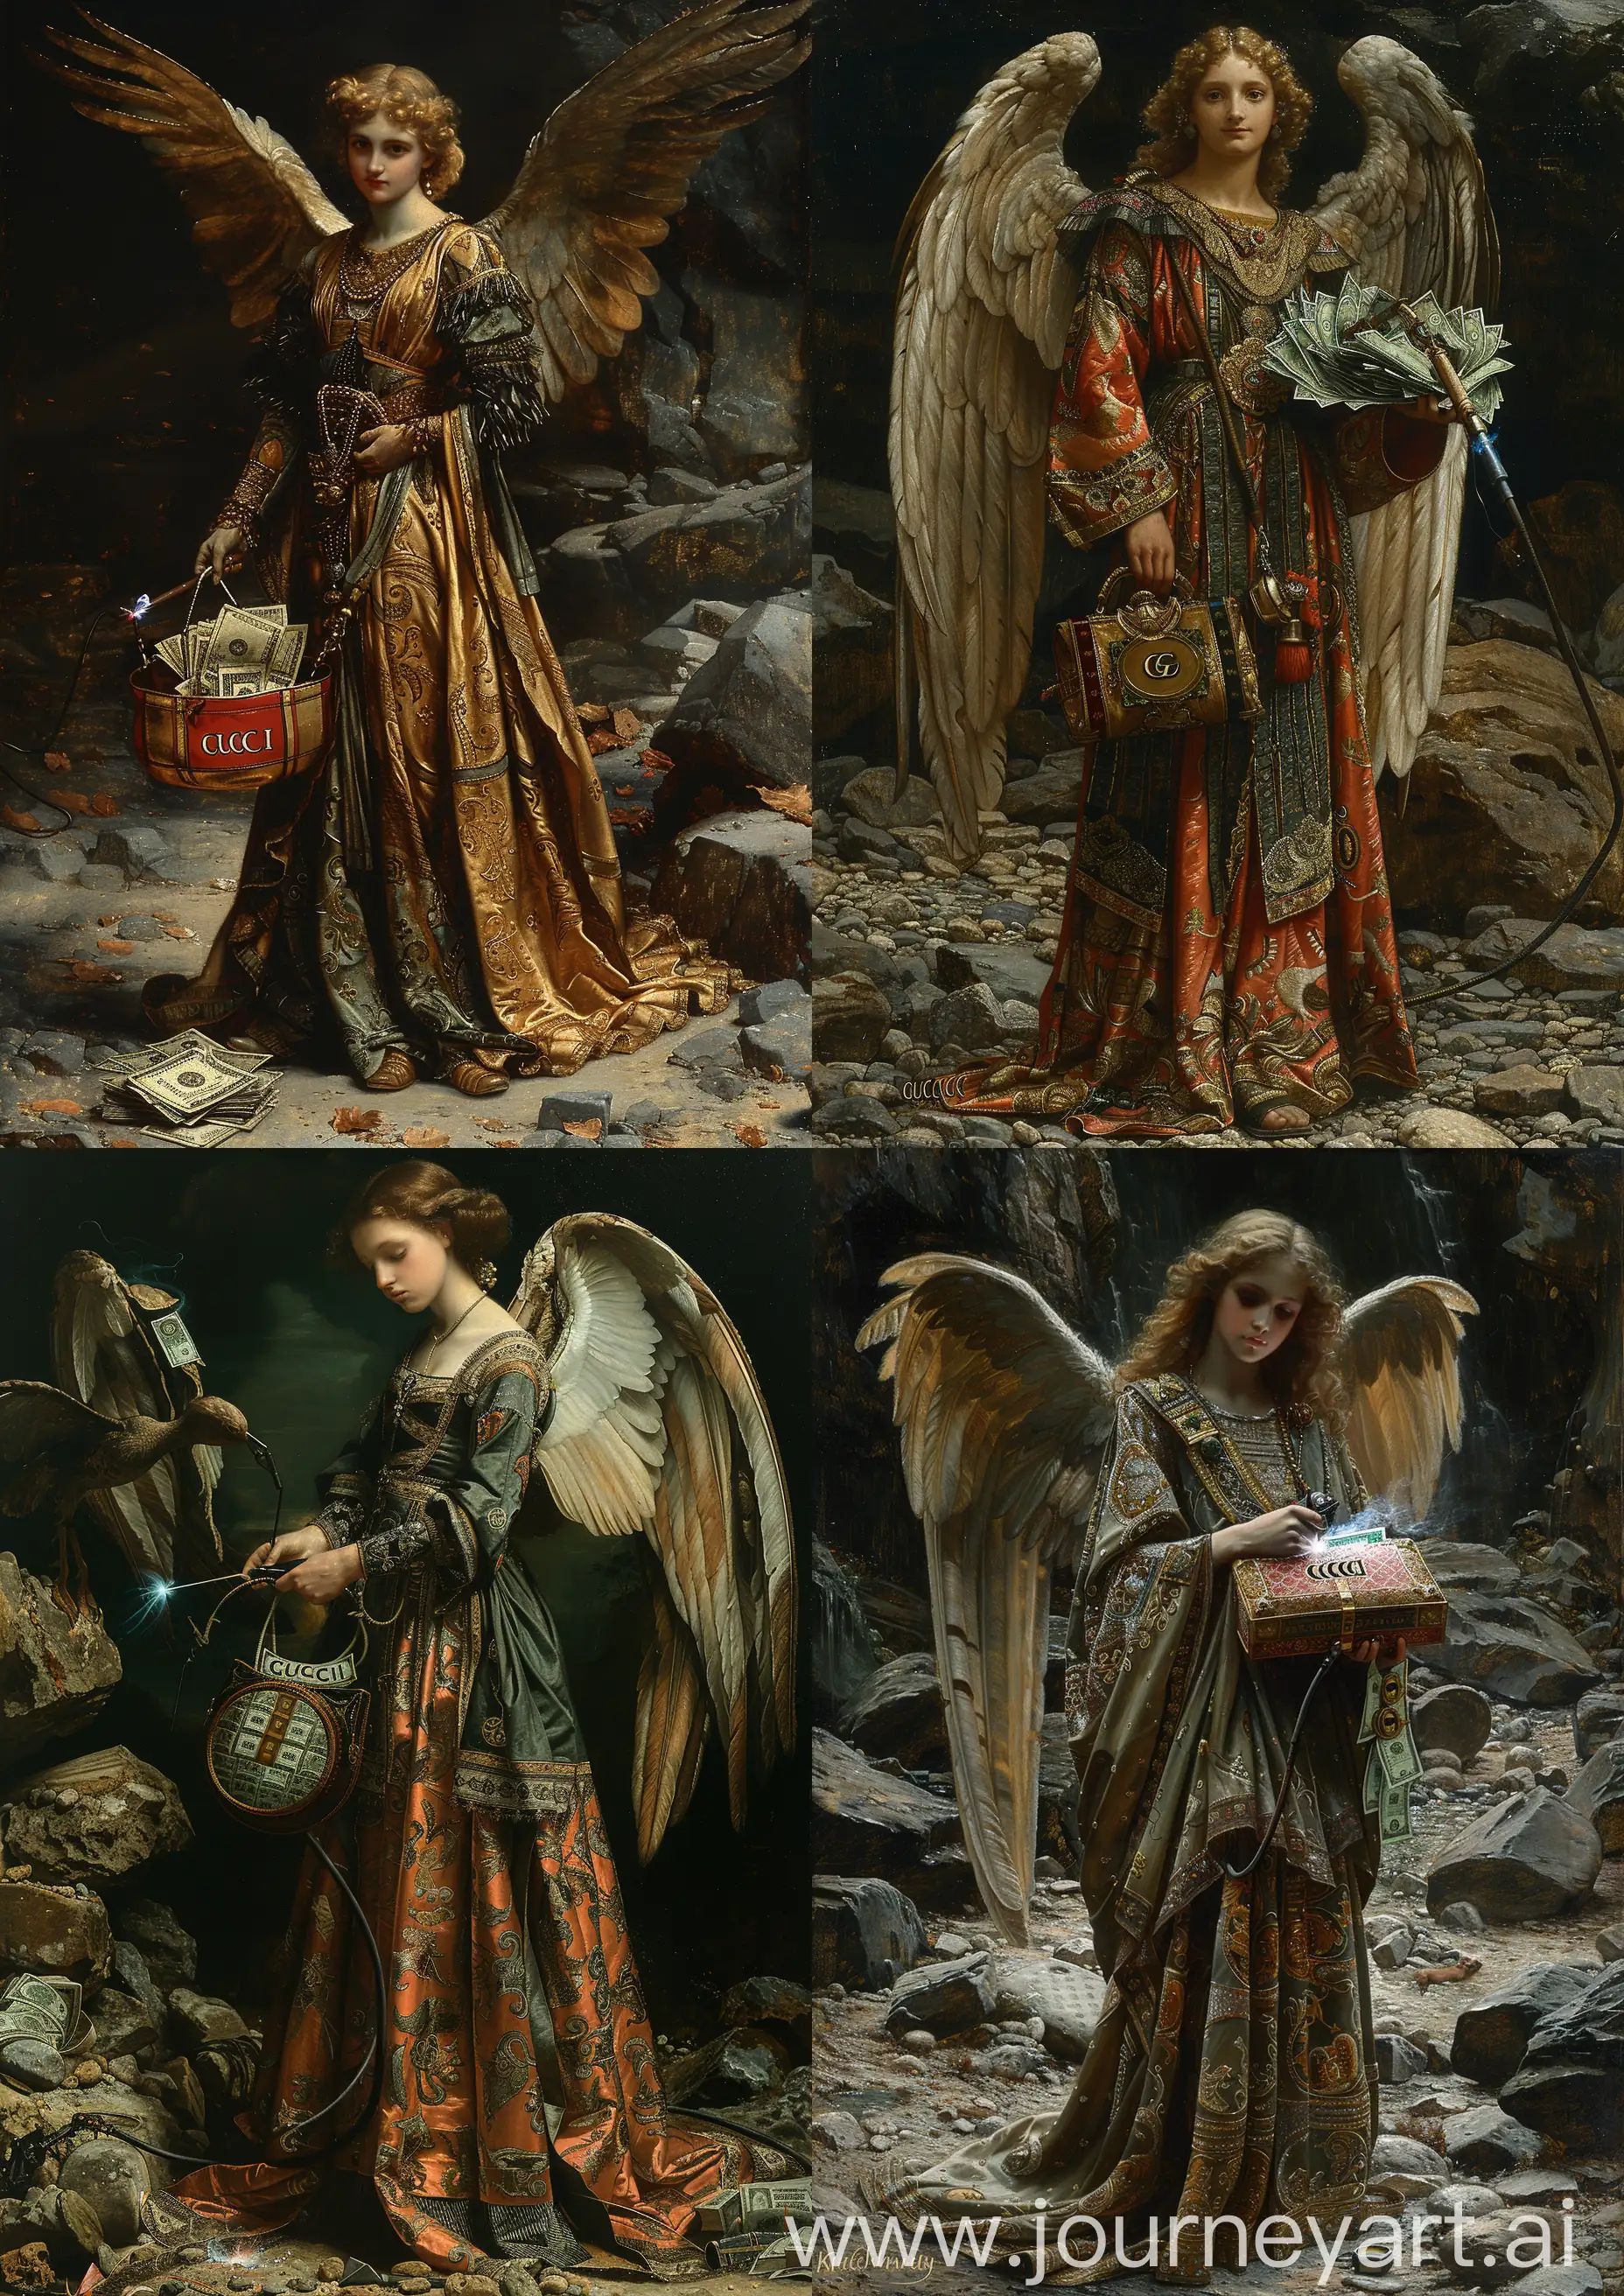 Female-Angel-Warrior-in-Ornate-Silk-Robes-with-Gucci-Bag-of-Money